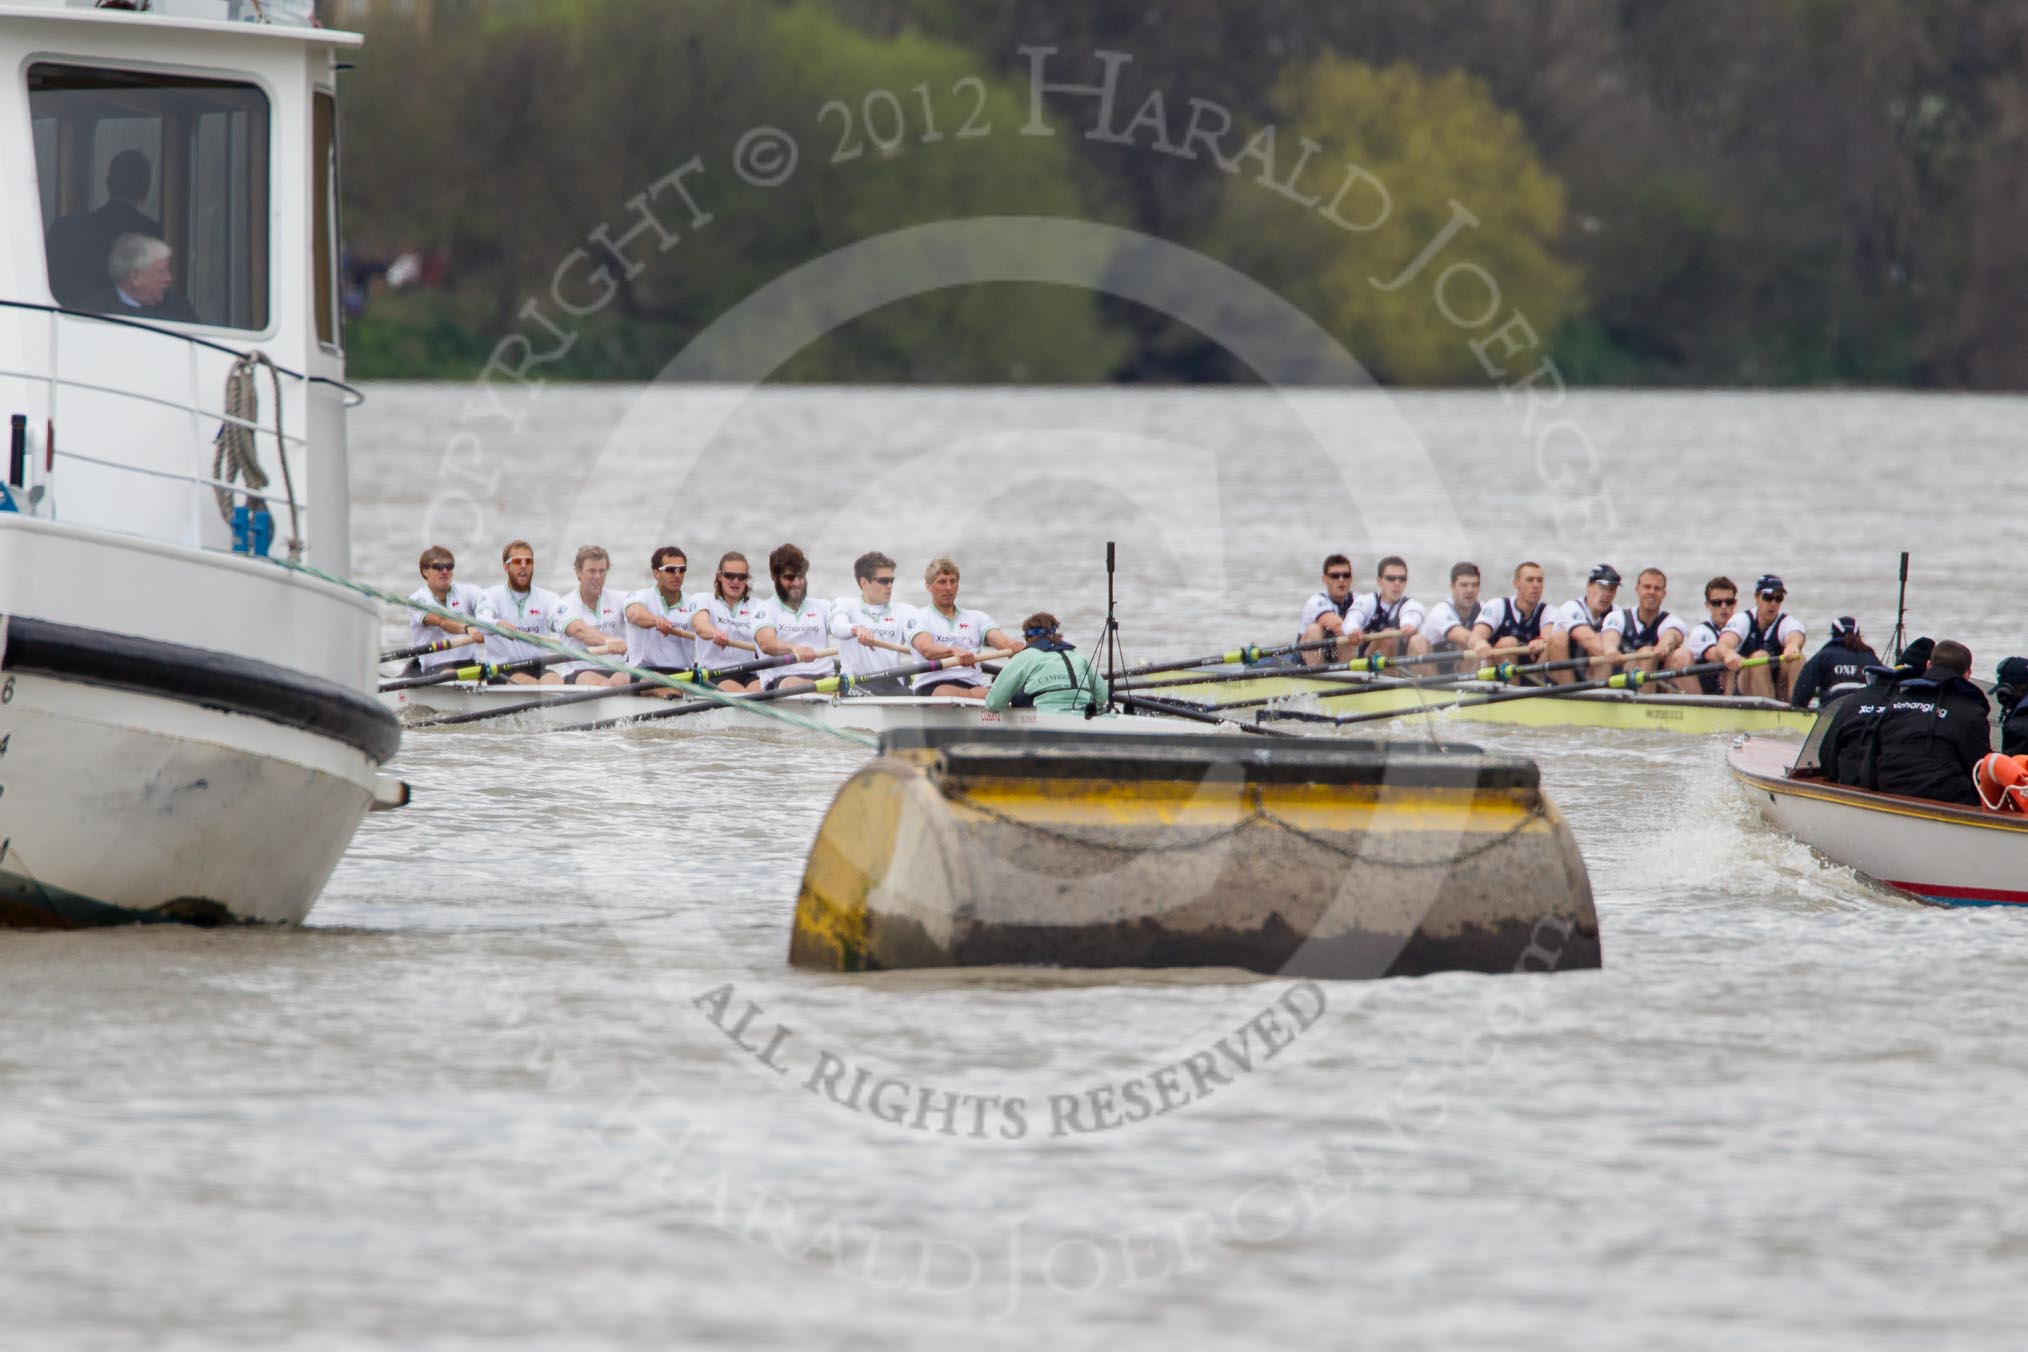 The Boat Race 2012: The 2012 Boat Race, shortly after the start: In the foreground the Cambridge Blue Boat, with David Nelson, Moritz Schramm, Jack Lindeman, Alex Ross, Mike Thorp, Steve Dudek, Alexander Scharp, Niles Garret, and cox Ed Bosson, in the Oxford boat Dr. Alexander Woods, William Zeng, Kevin Baum, Alex Davidson, Karl Hudspith, Dr. Hanno Wienhausen, Dan Harvey, stroke Roel Haen, and cox Zoe de Toledo..




on 07 April 2012 at 14:17, image #272